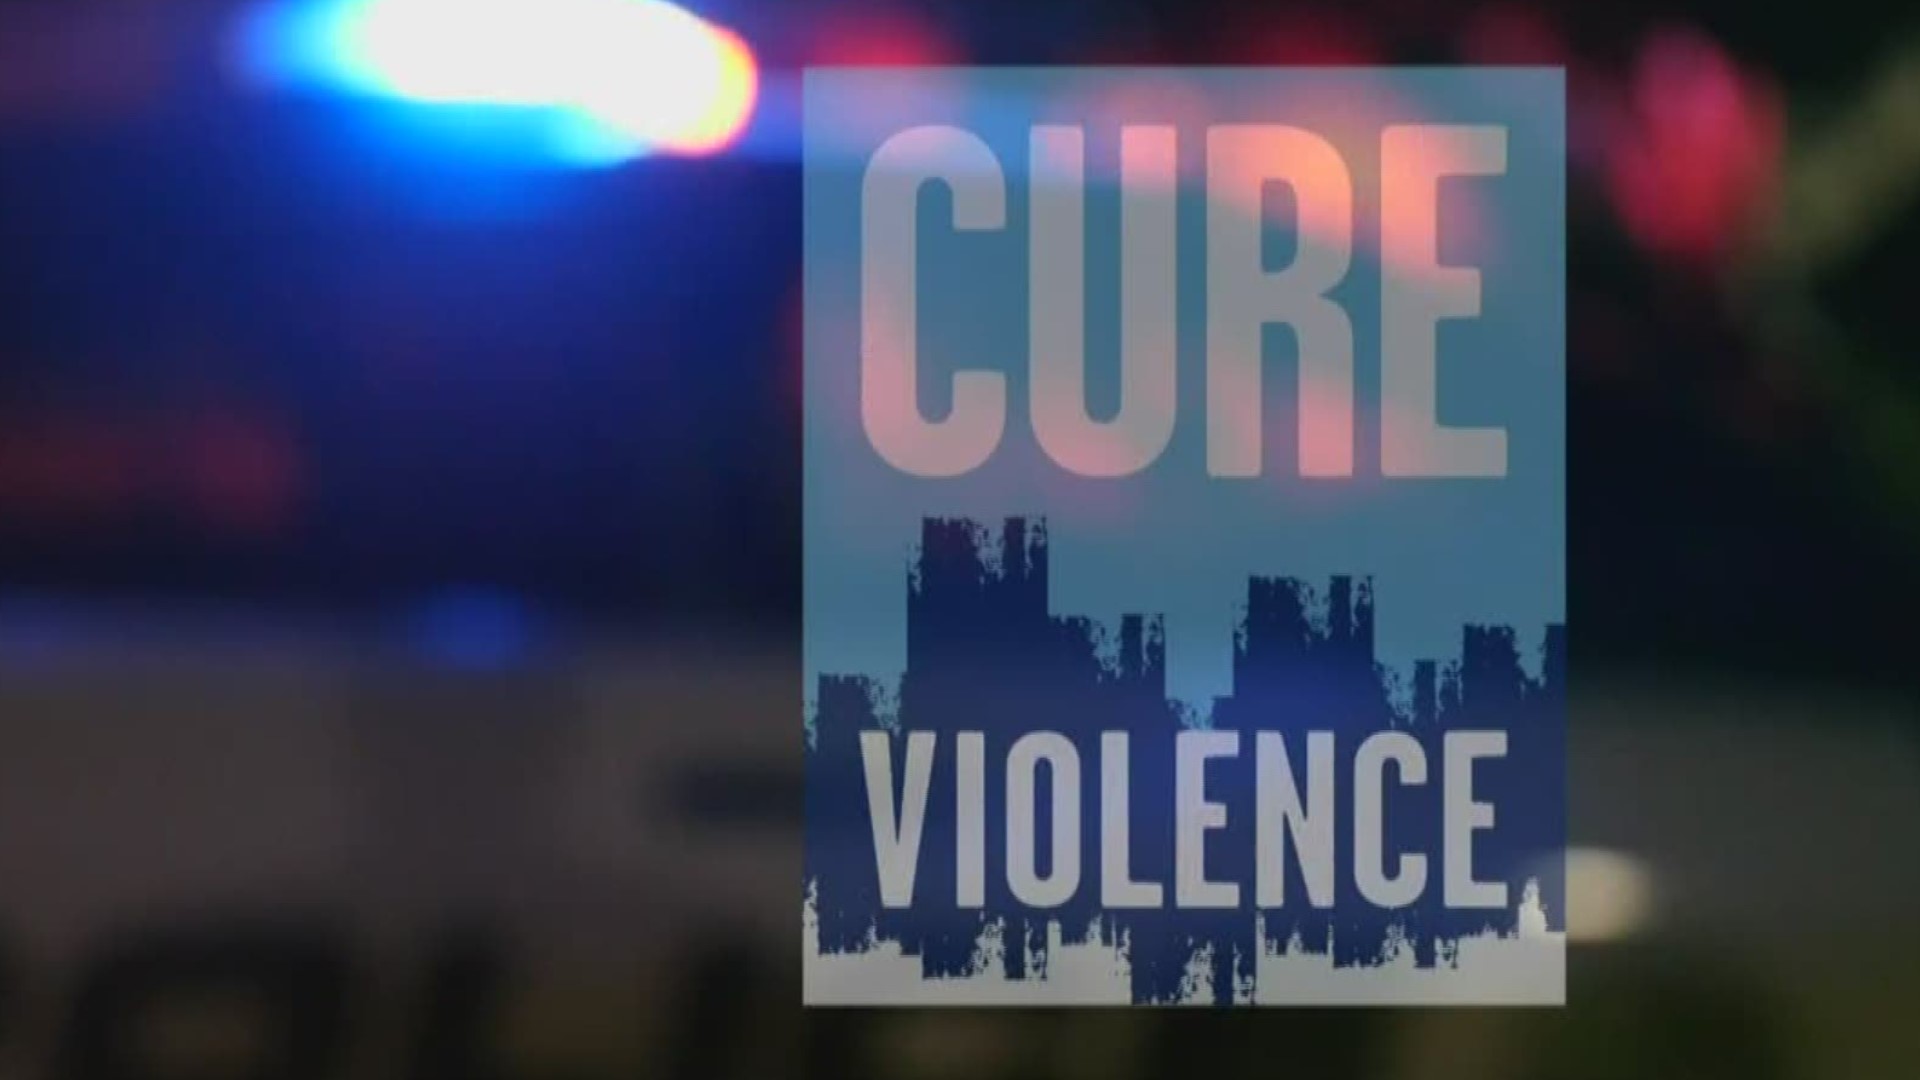 Cure Violence advocates to meet at City Hall